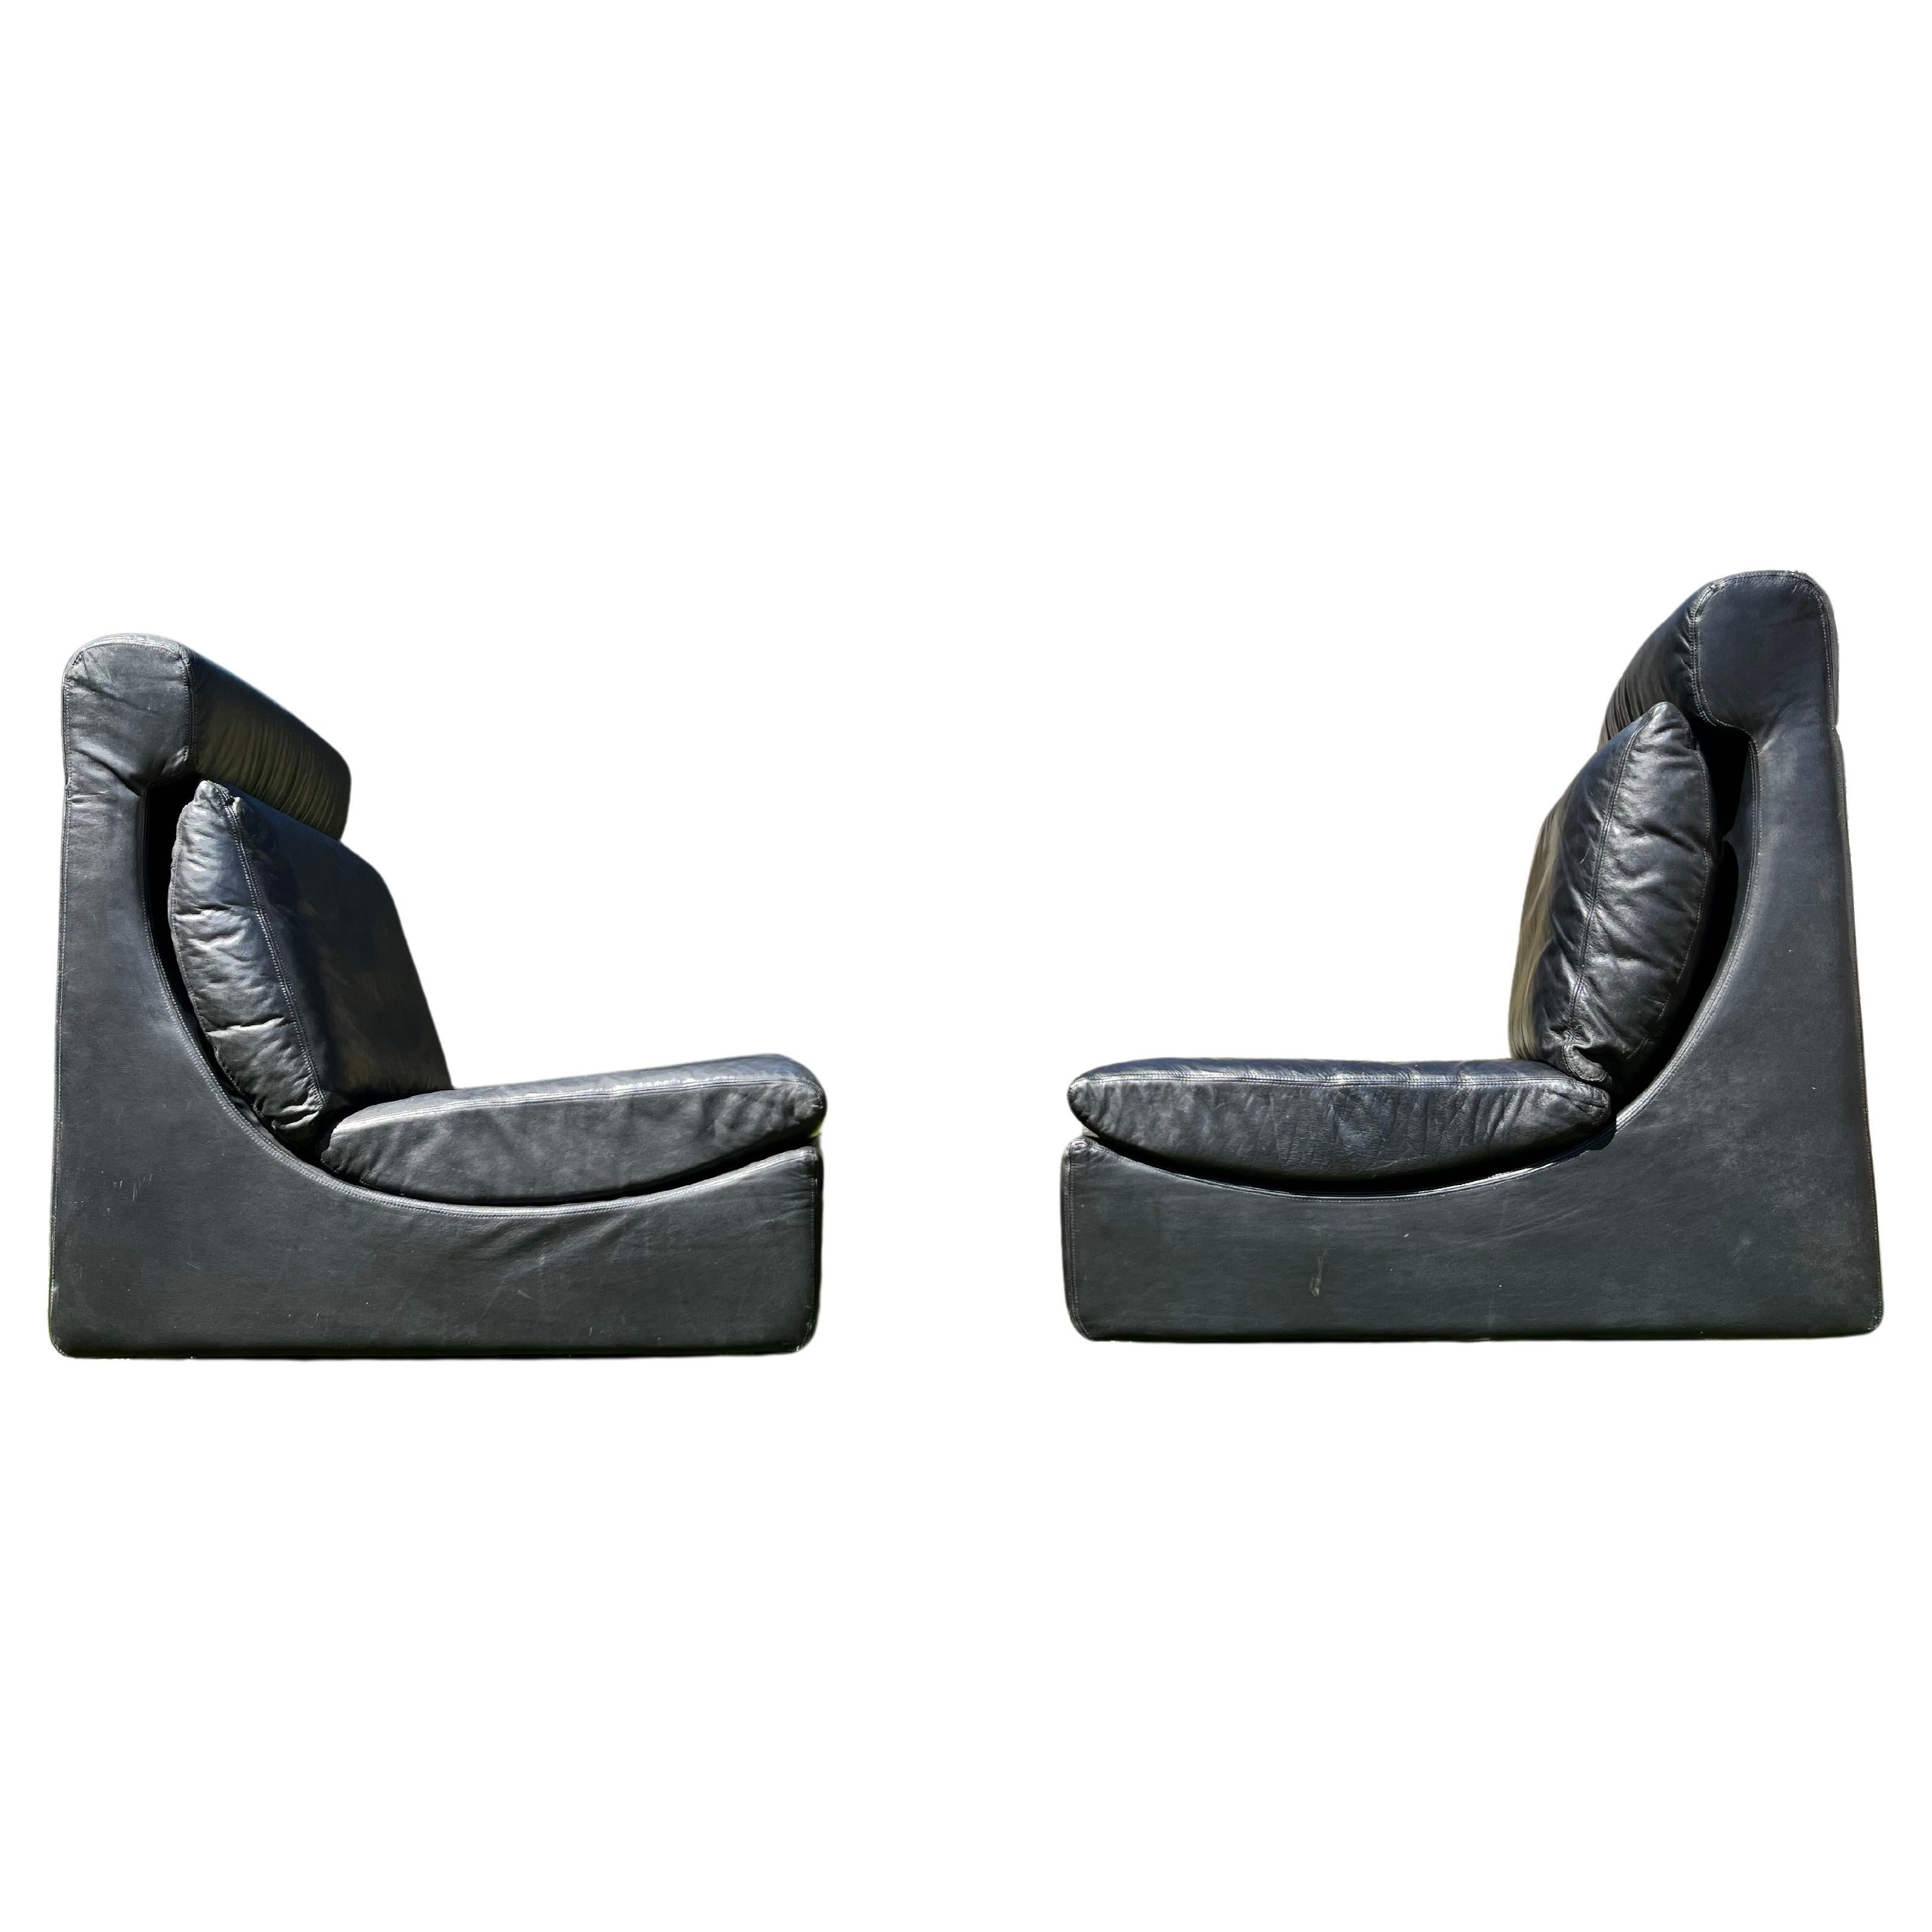 Pair of Two Black Leather Modular Sofa Chairs by Walter Knoll, Germany, 1970s For Sale